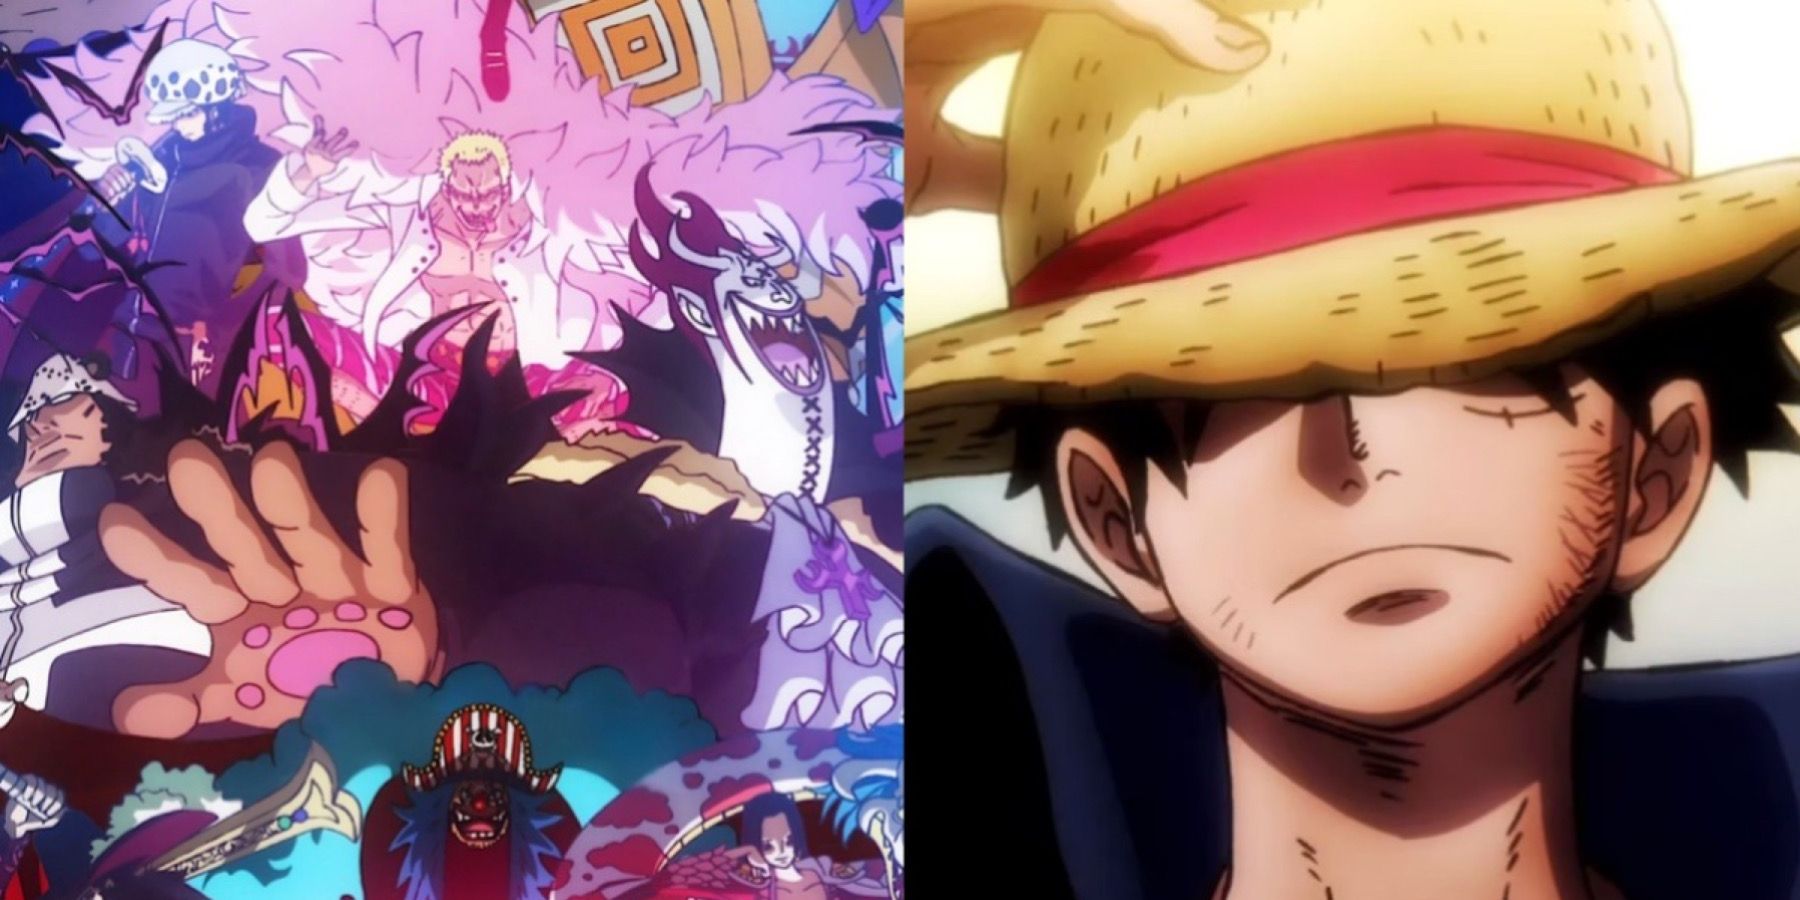 How long are the One Piece anime and manga?